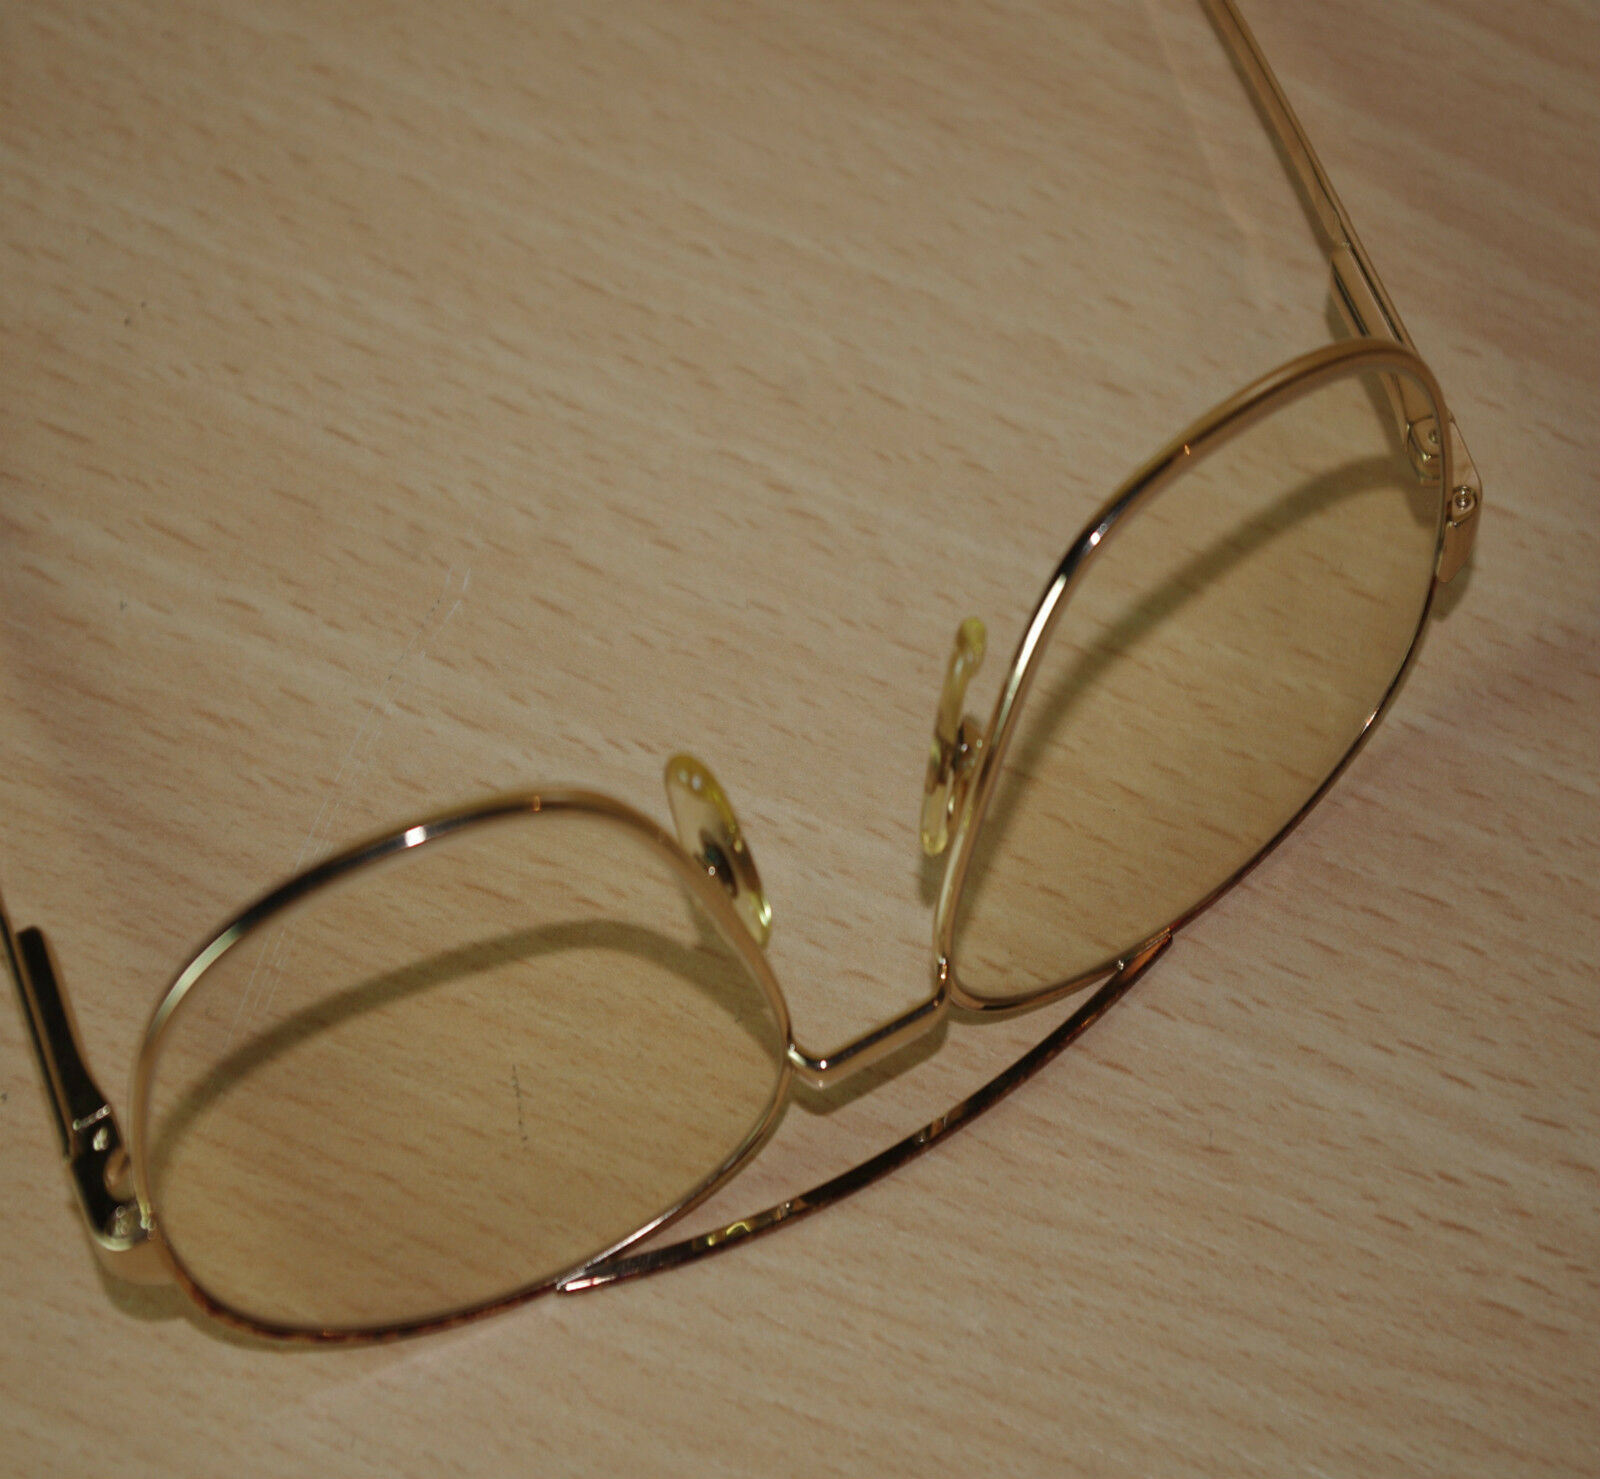 Lunettes-monture-Eyeglasses-BOURGEOIS-ORION-LEMASTERBROCKERS-MADE-IN-FRANCE-OCCASION-OKAZ